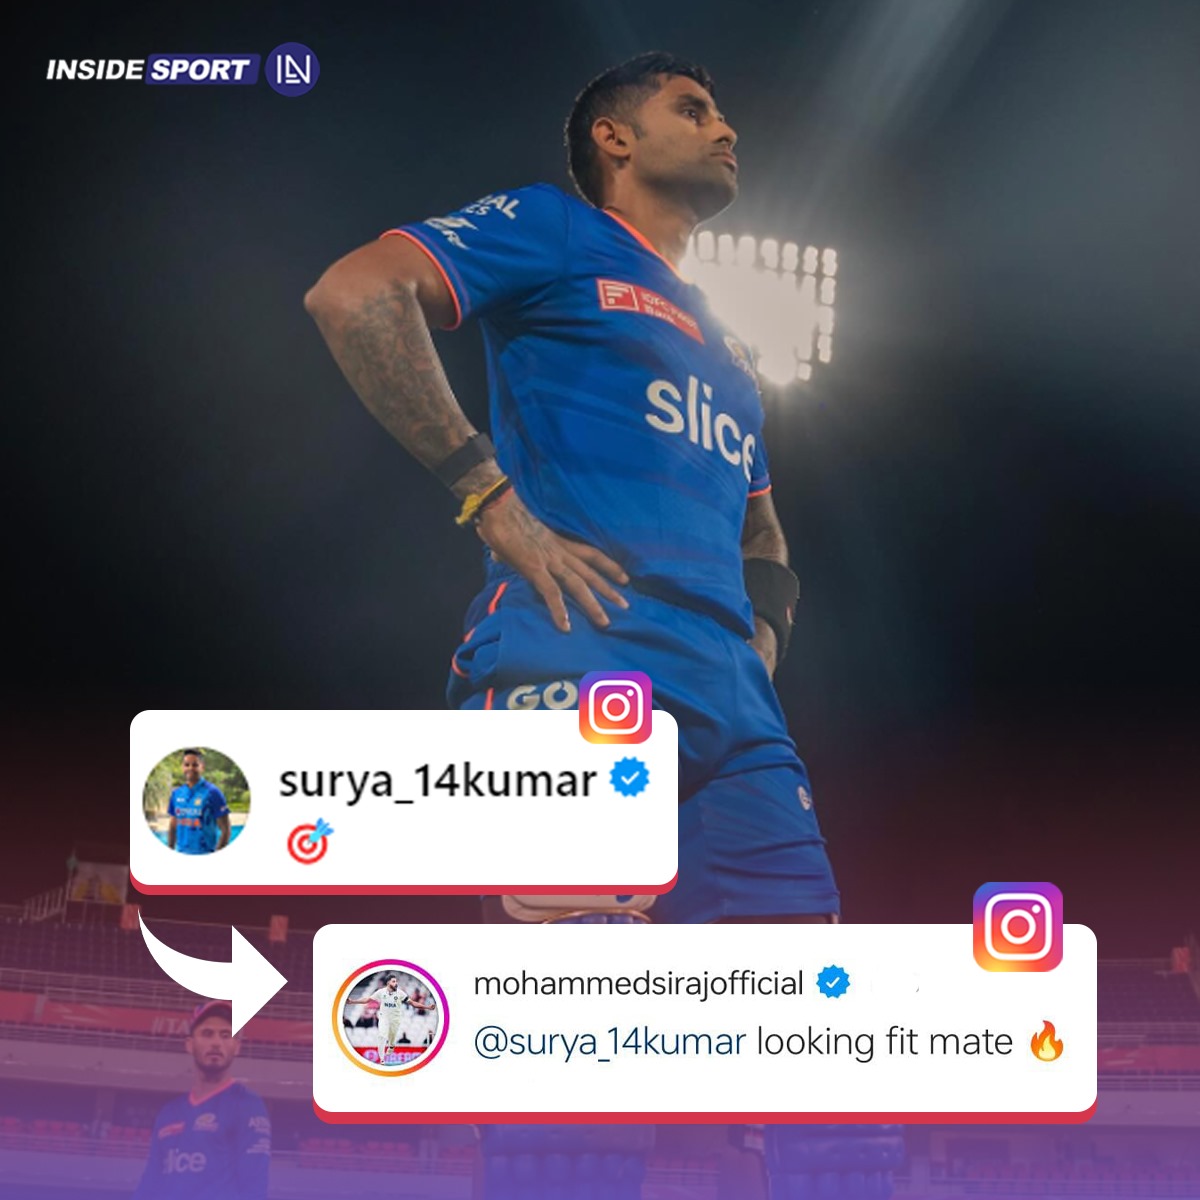 Mohd Siraj is happy to see his Indian counterpart fit and healthy 💙

#SuryakumarYadav #MSiraj #IPL24 #Indiancricket #Insidesport #crickettwitter